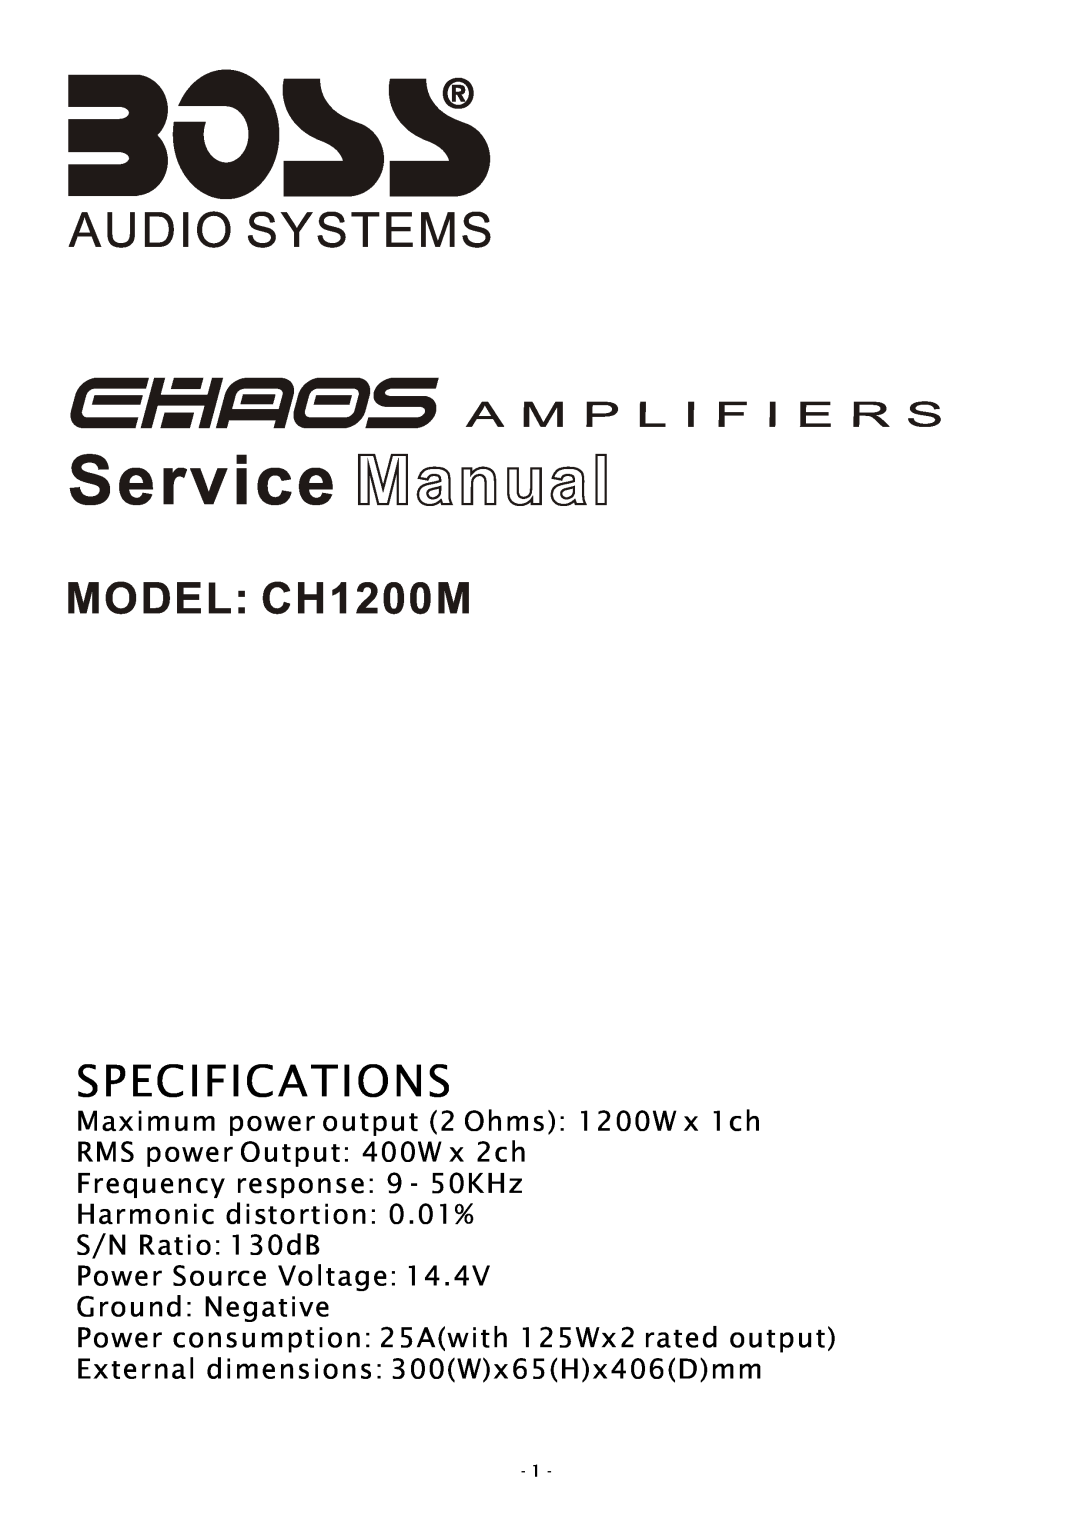 Boss Audio Systems specifications MODEL CH1200M, Specifications, Frequency response 9 - 50KHz Harmonic distortion 0.01% 